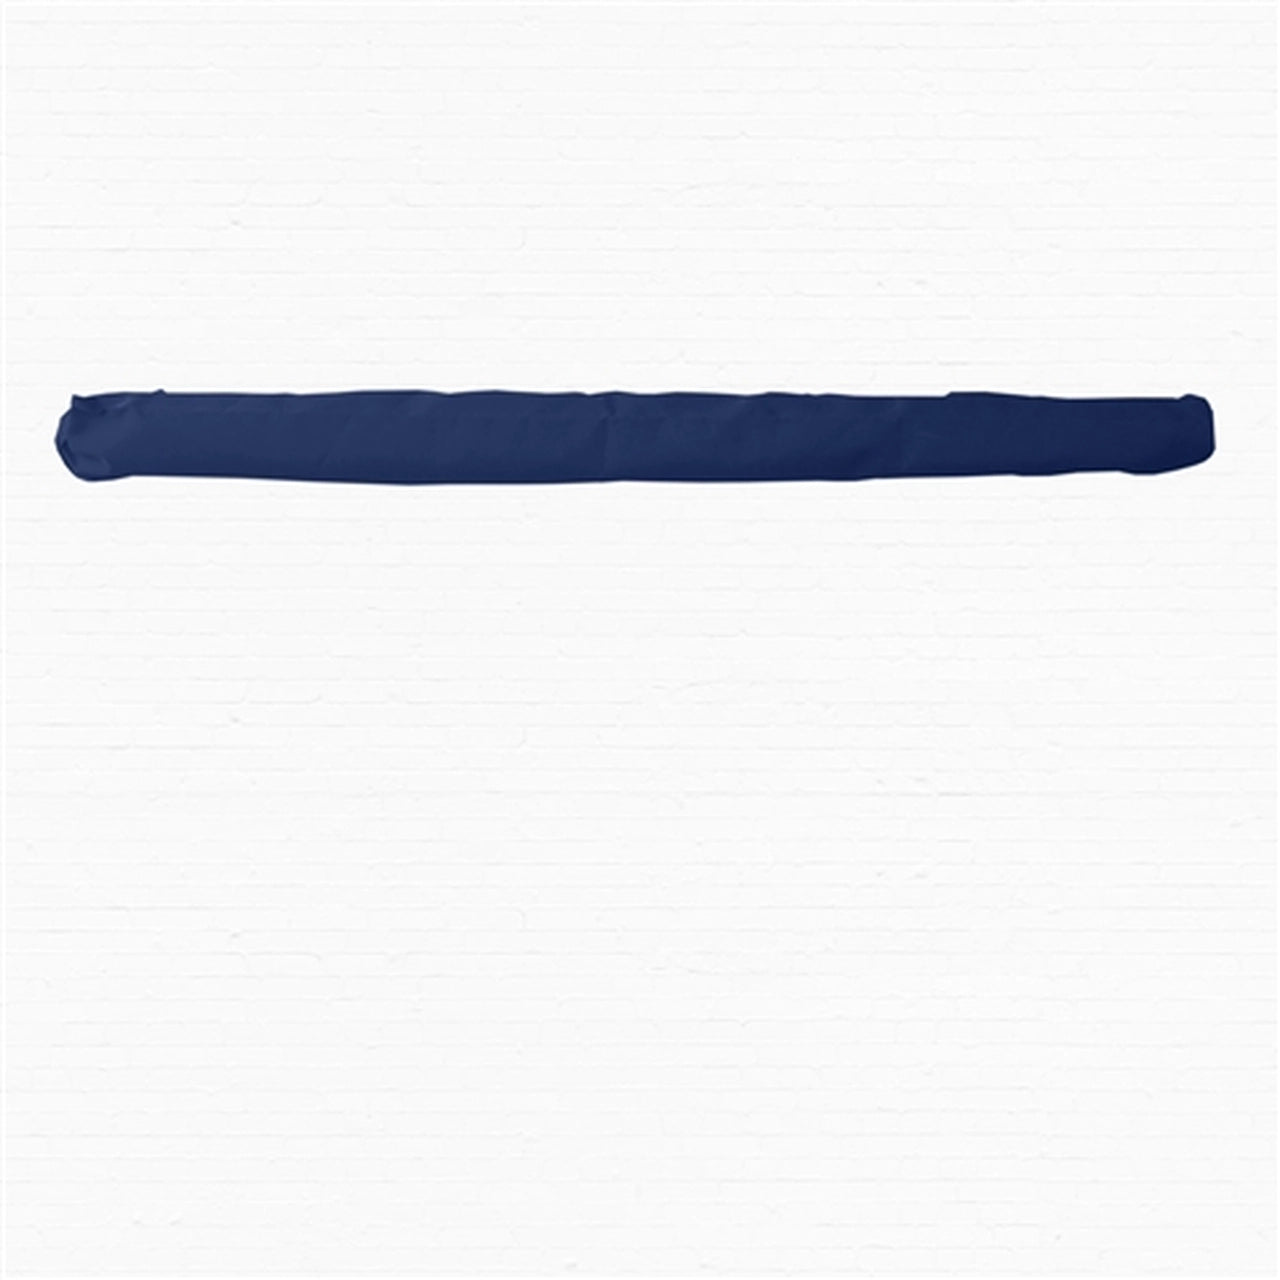 Aleko Protective Awning Cover - 13 x 10 Feet - Blue